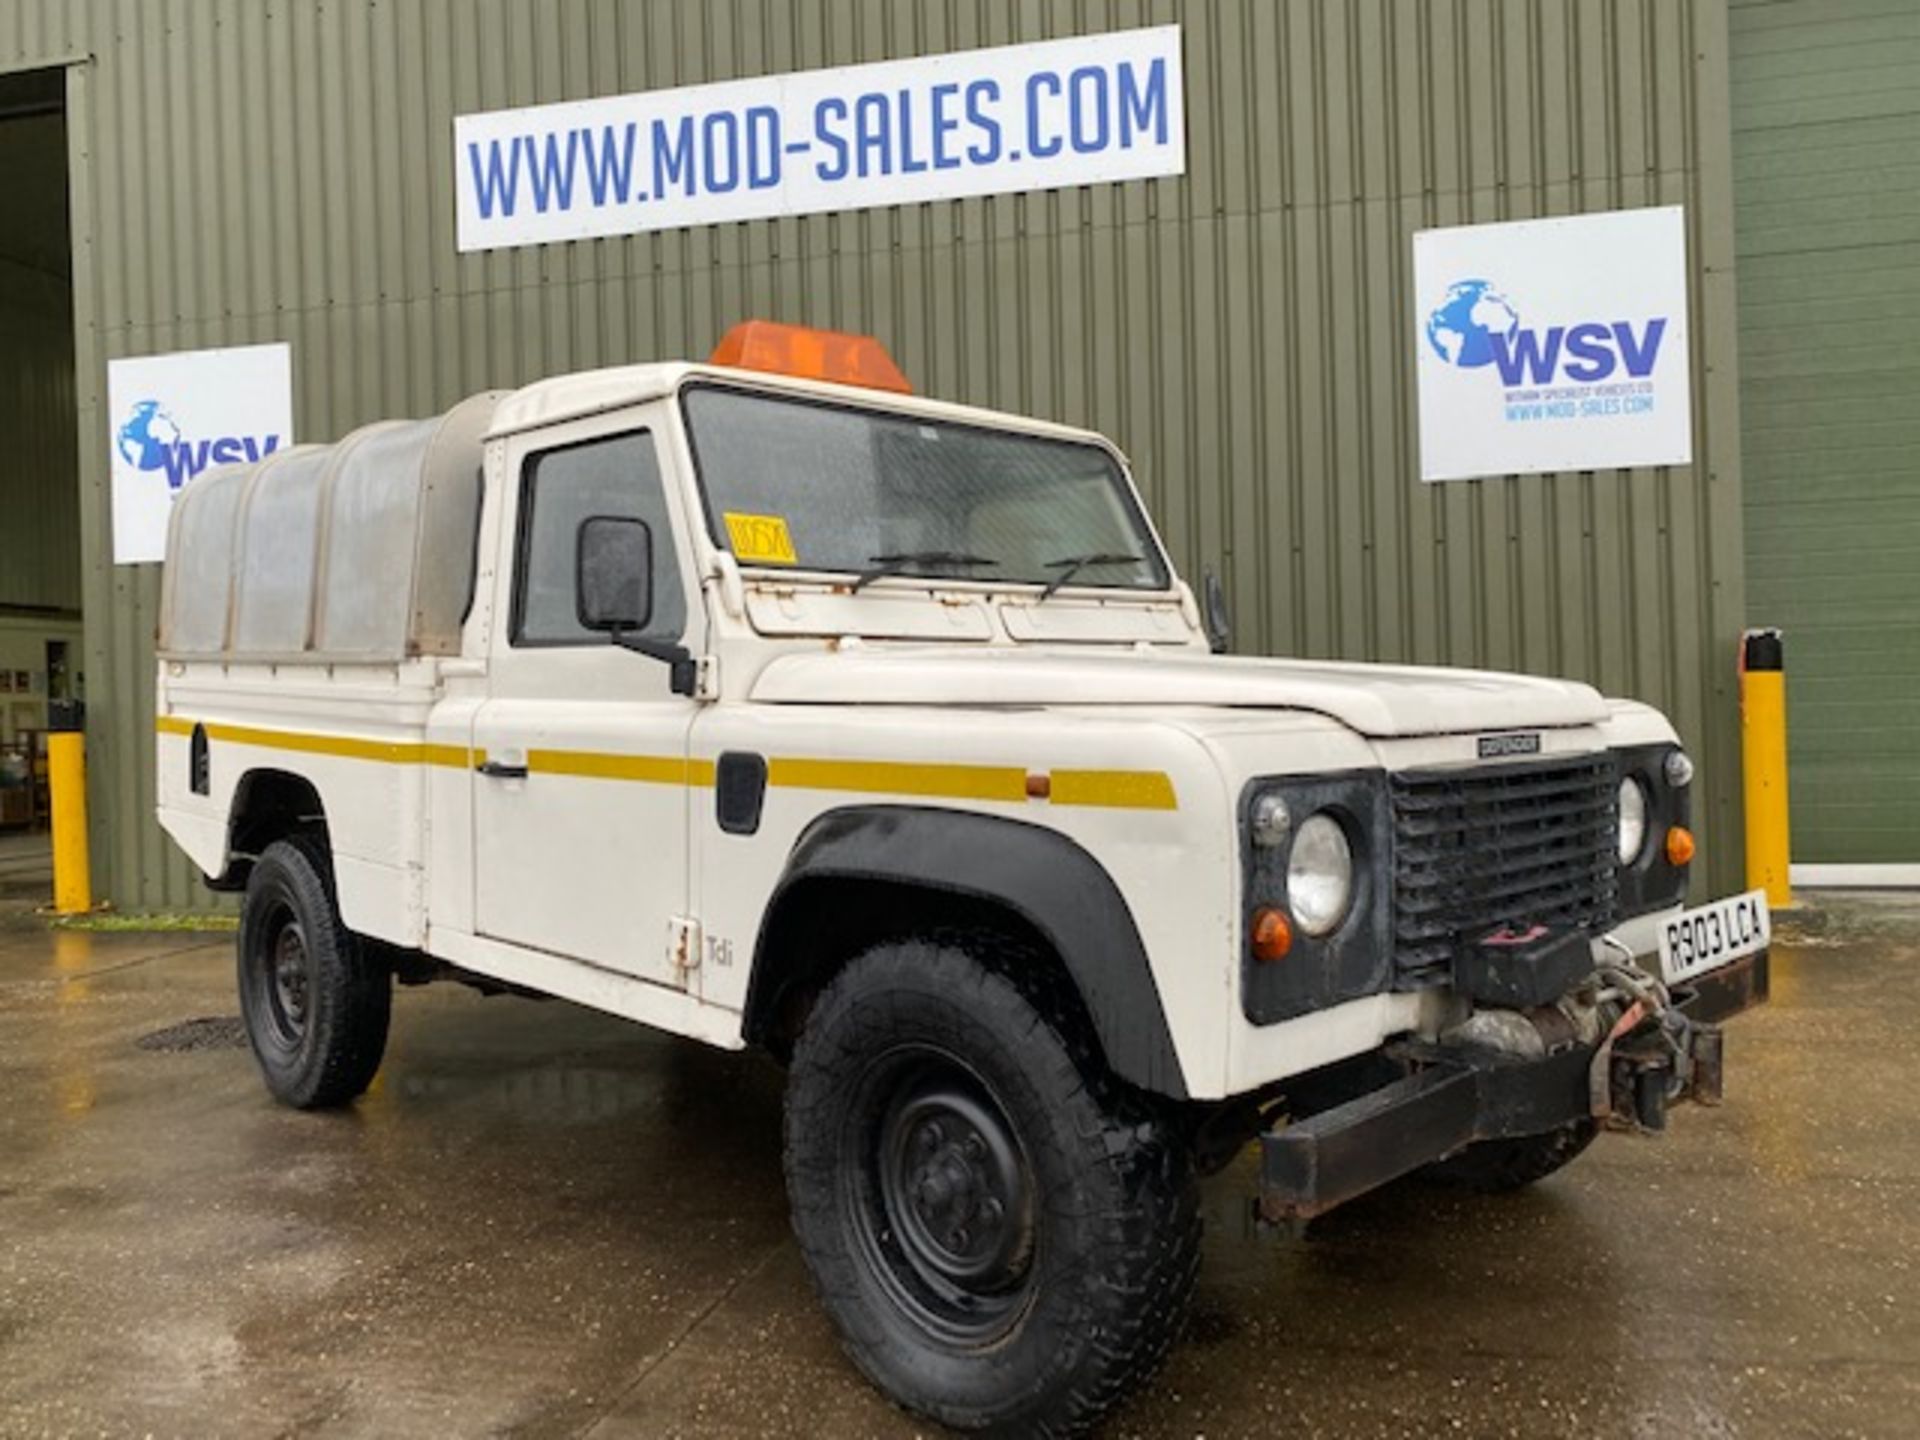 1 Owner Recent Release from UK Council 1998 Land Rover Defender 110 Hi-Capacity Pick Up - Image 2 of 41